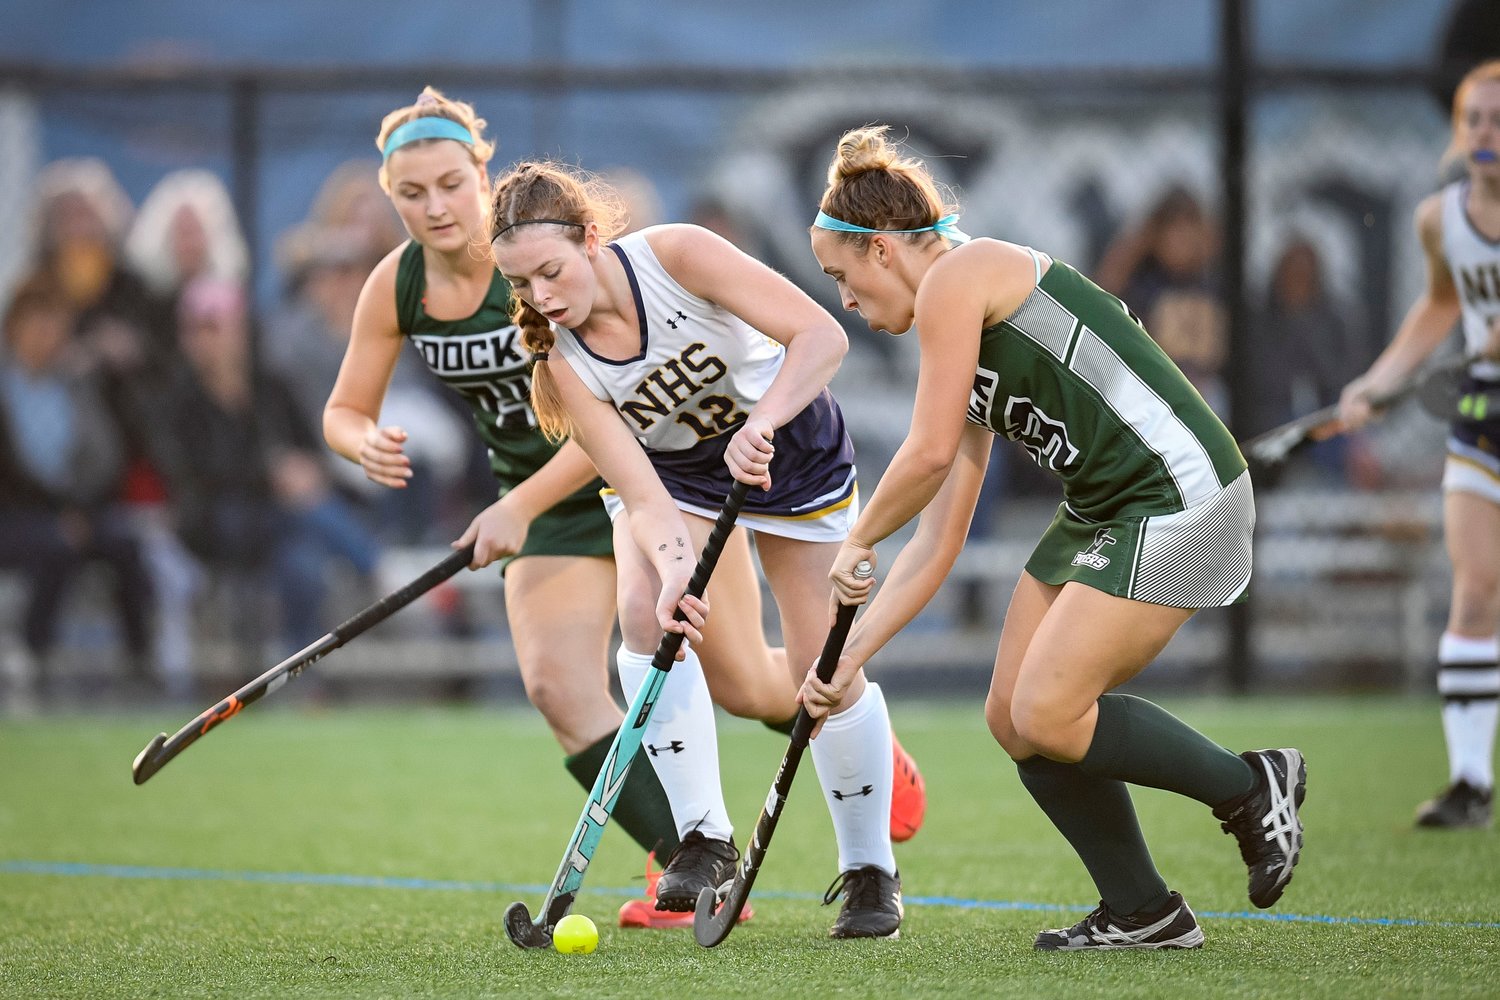 New Hope-Solebury’s Rylee Logston gets off a pass between two Dock defenders.